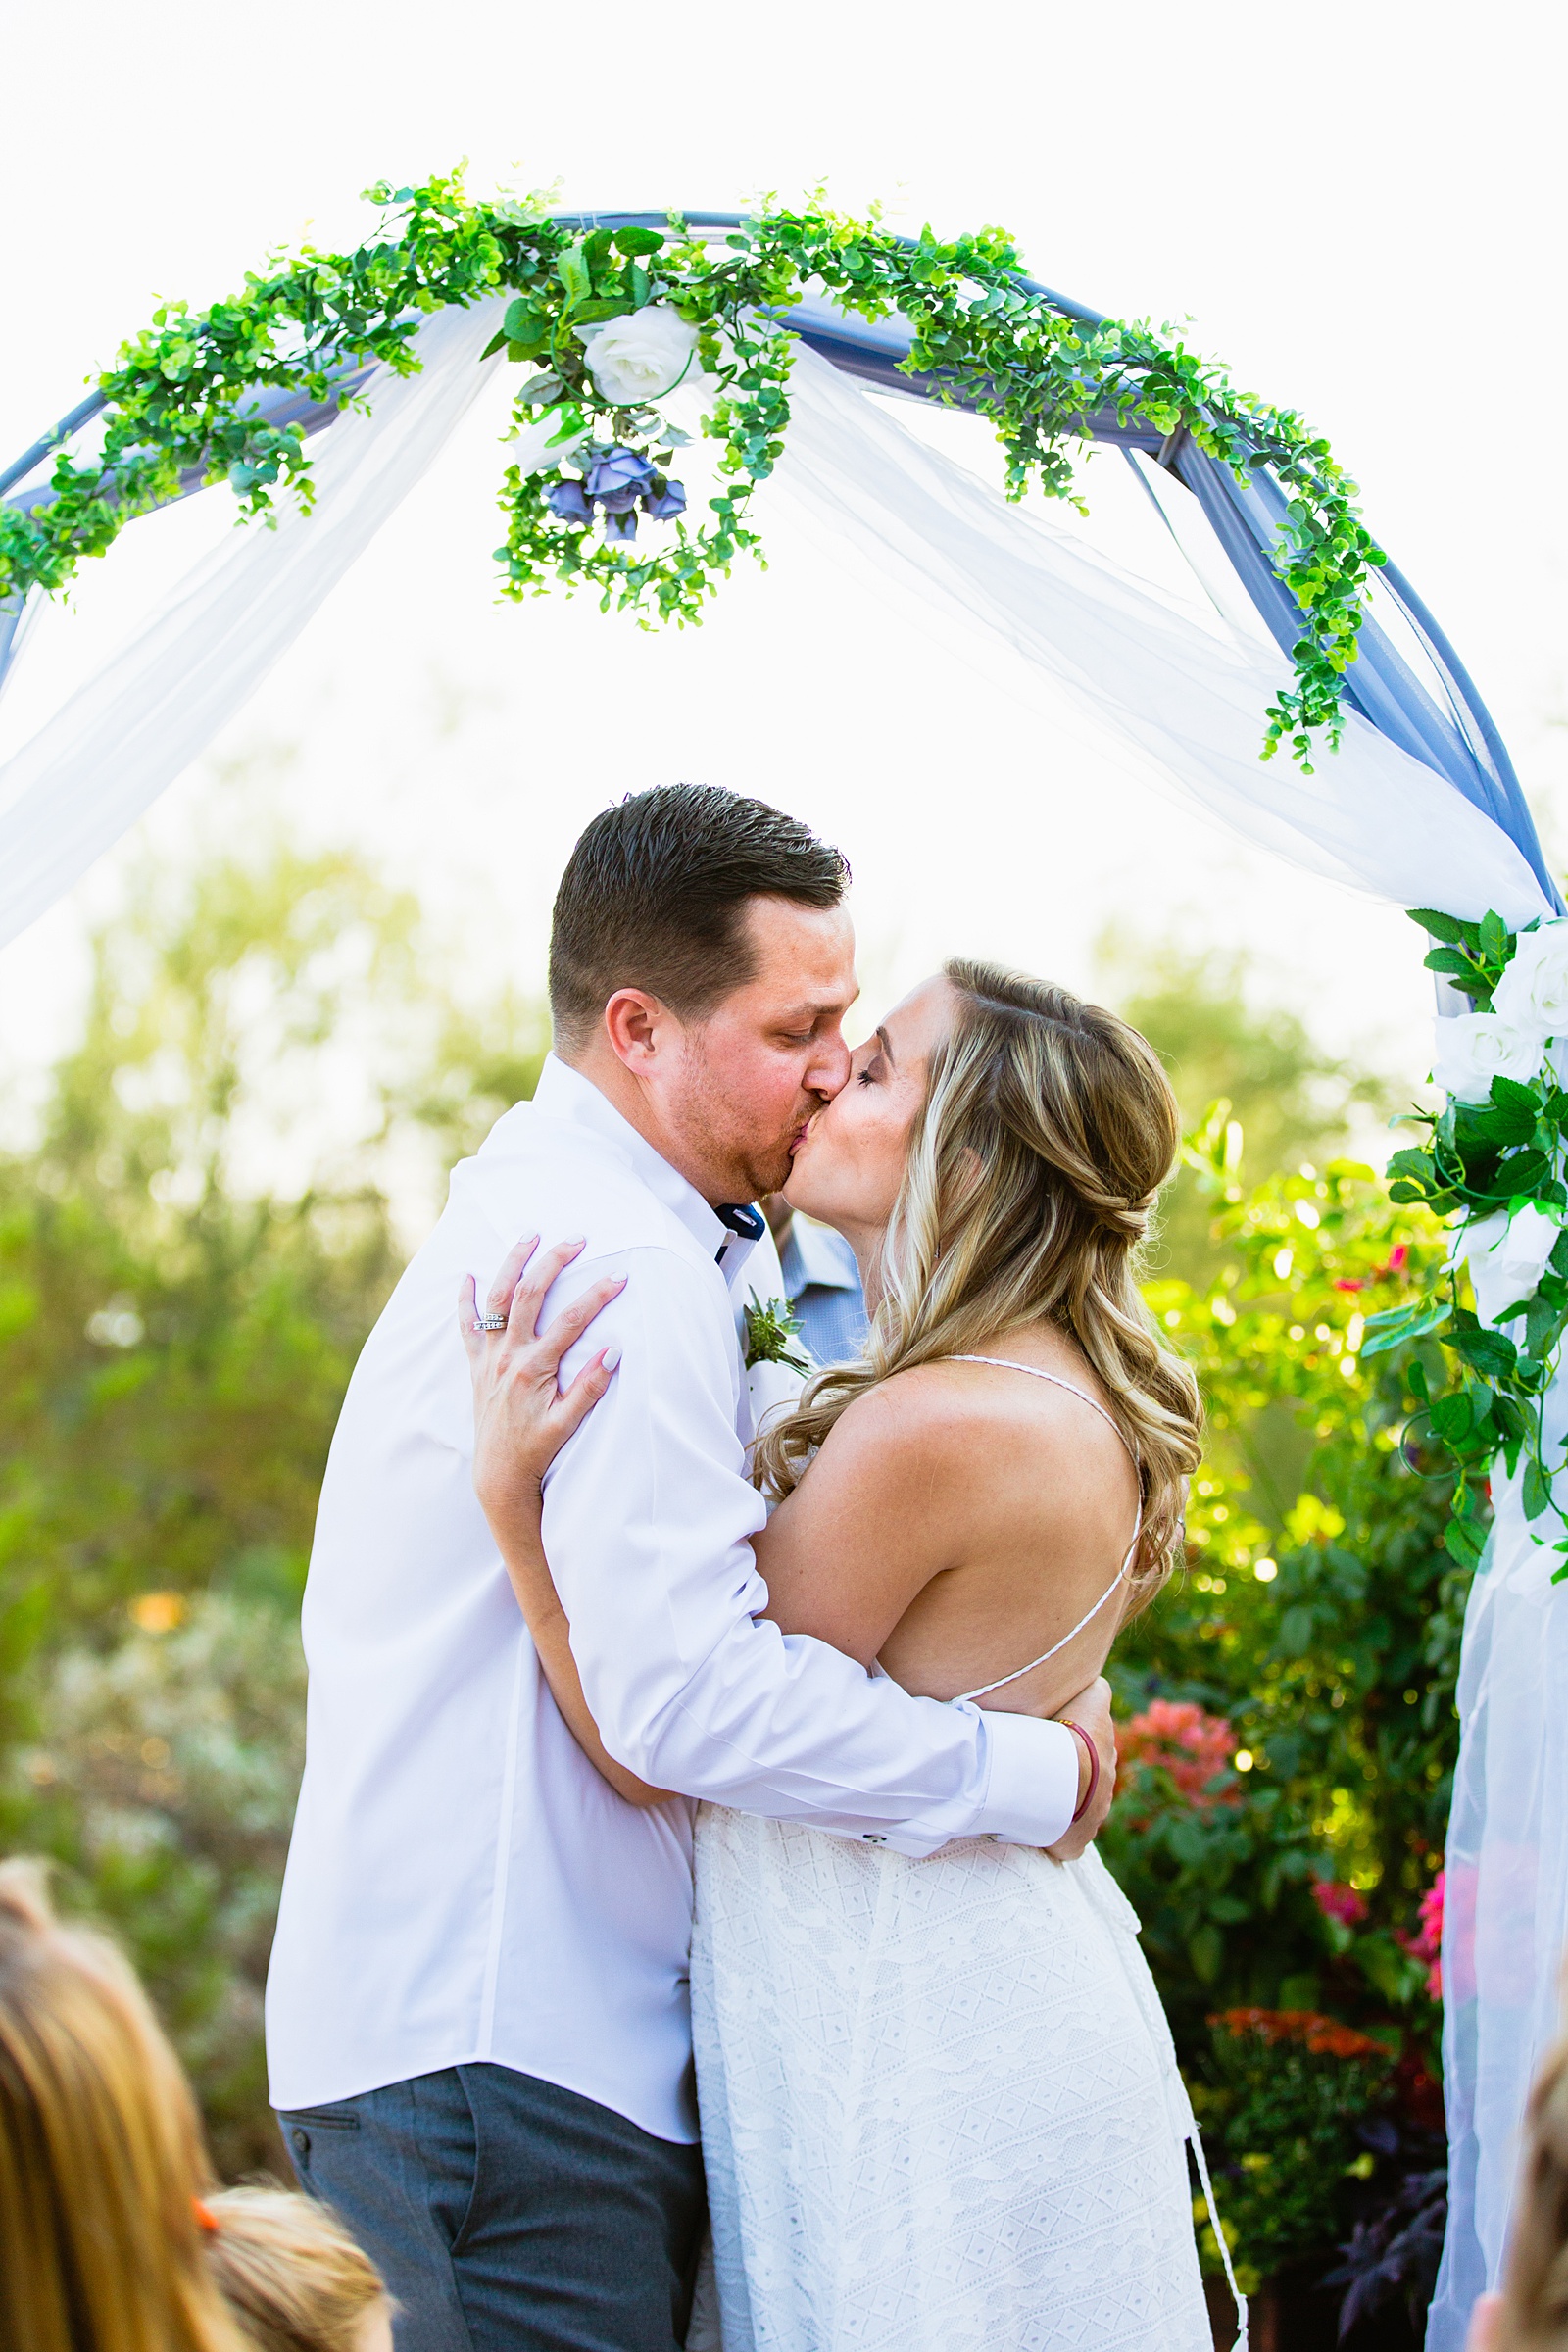 Bride and Groom share their first kiss during their wedding ceremony at a backyard by Arizona wedding photographer PMA Photography.